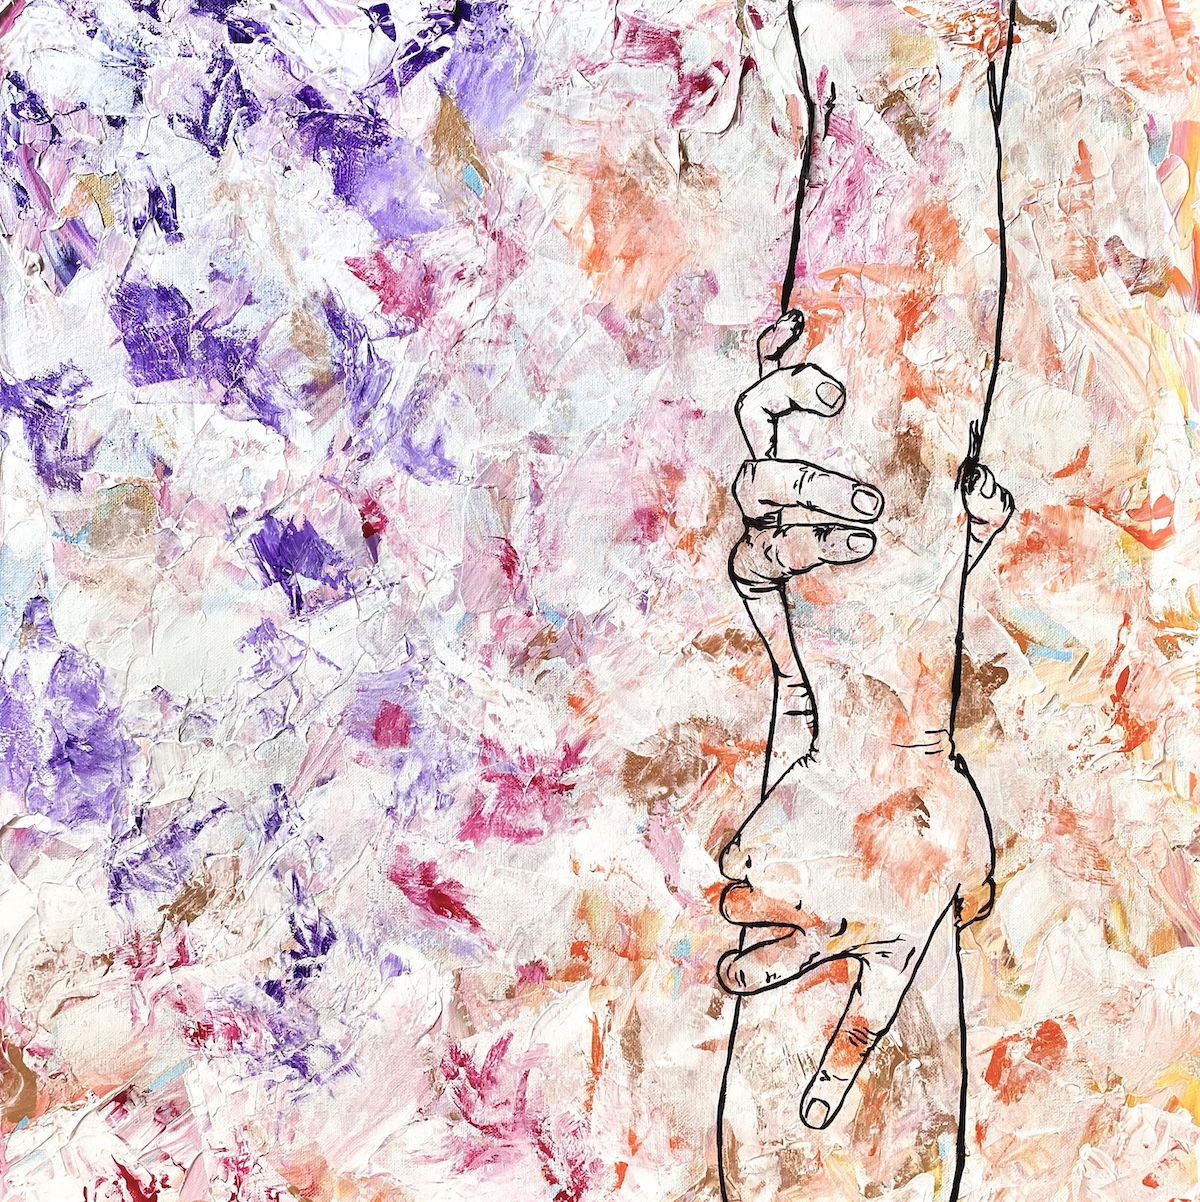 Colorful acrylic painting with black outlines of two arms grasping each other